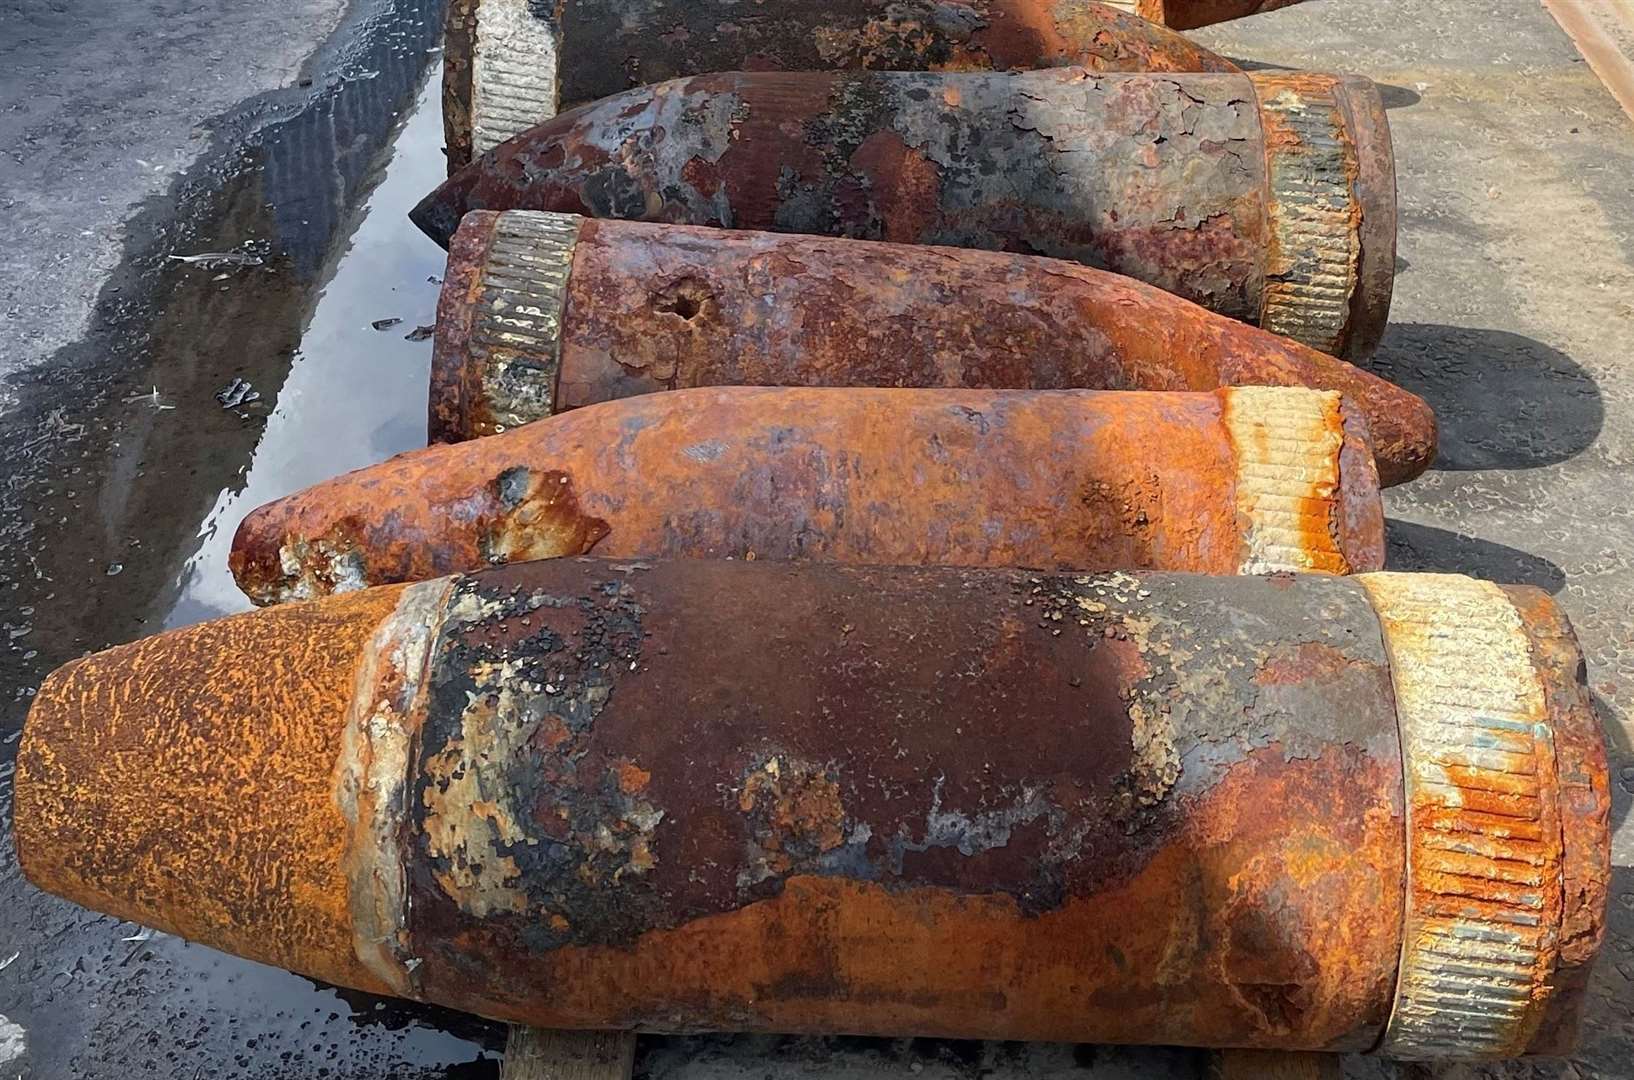 Some of the rusting unexploded devices disposed of by Eodex.